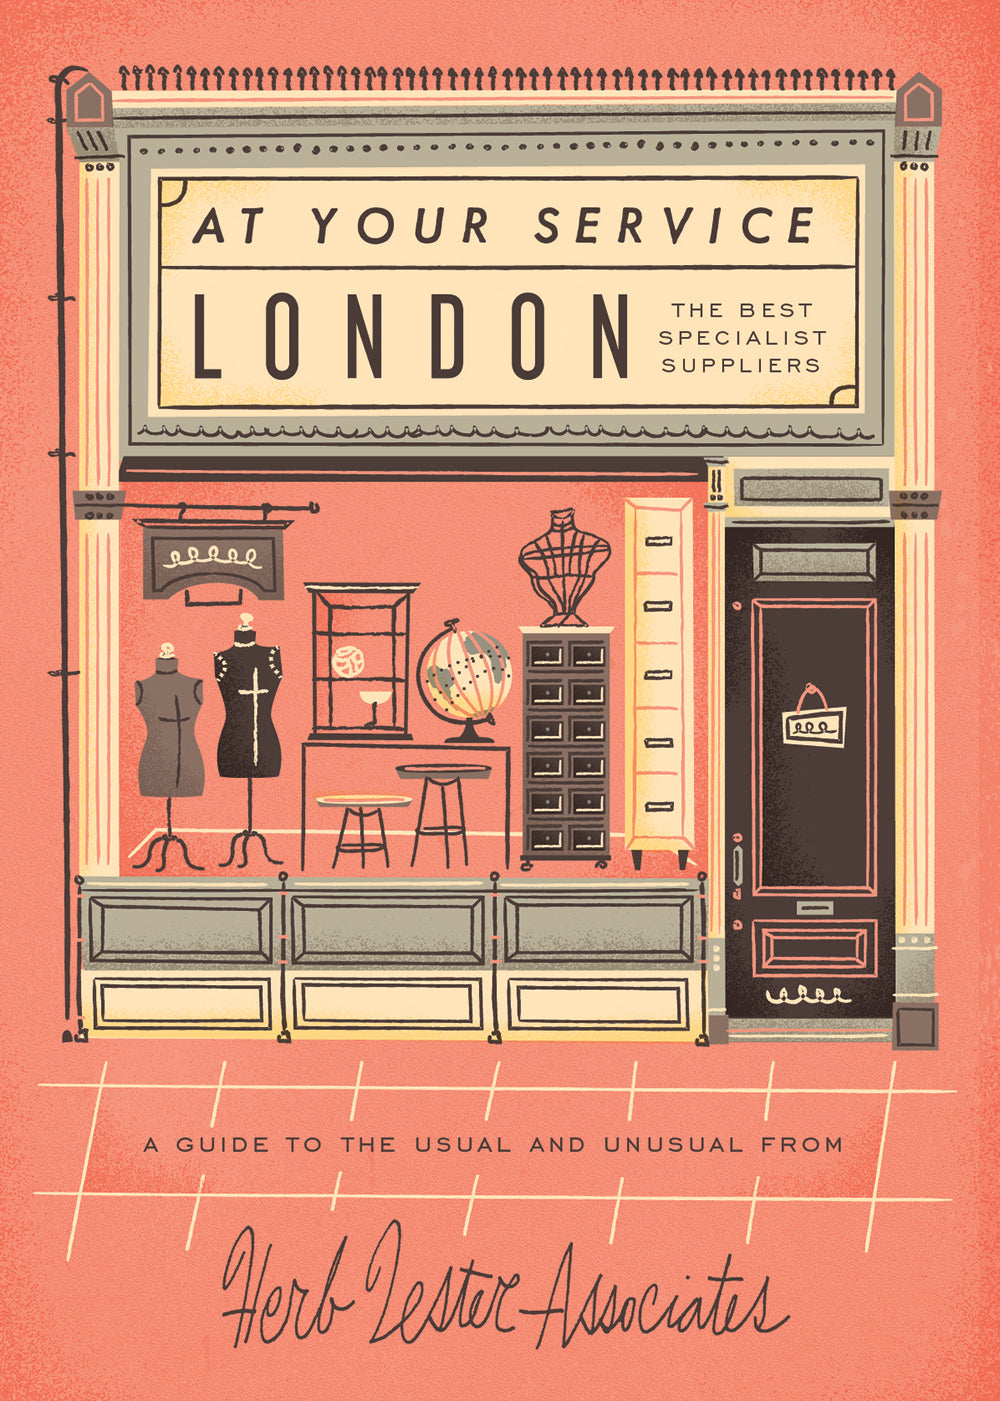 At Your Service: London's best specialist suppliers